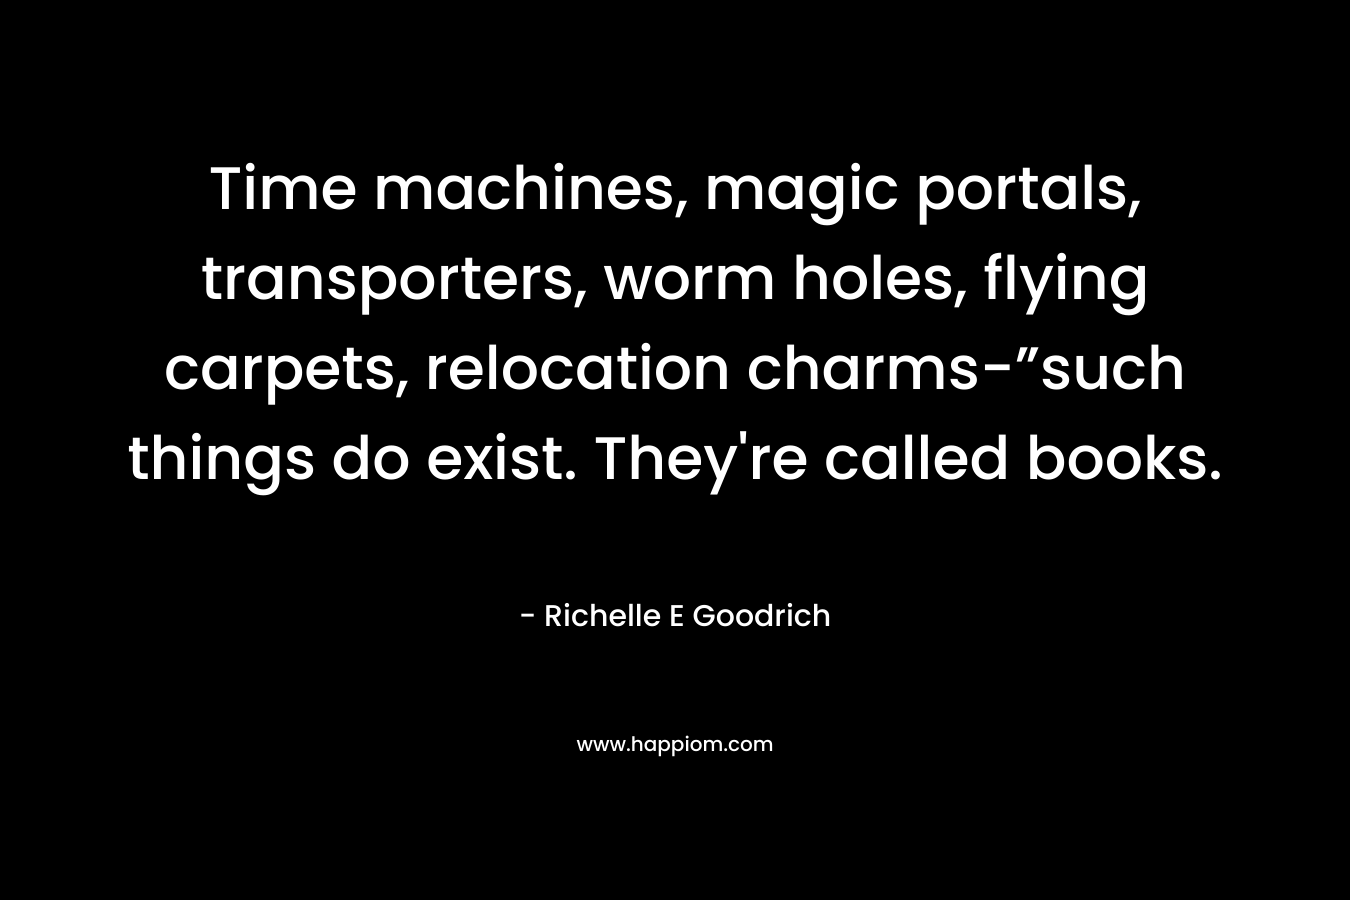 Time machines, magic portals, transporters, worm holes, flying carpets, relocation charms-”such things do exist. They're called books.